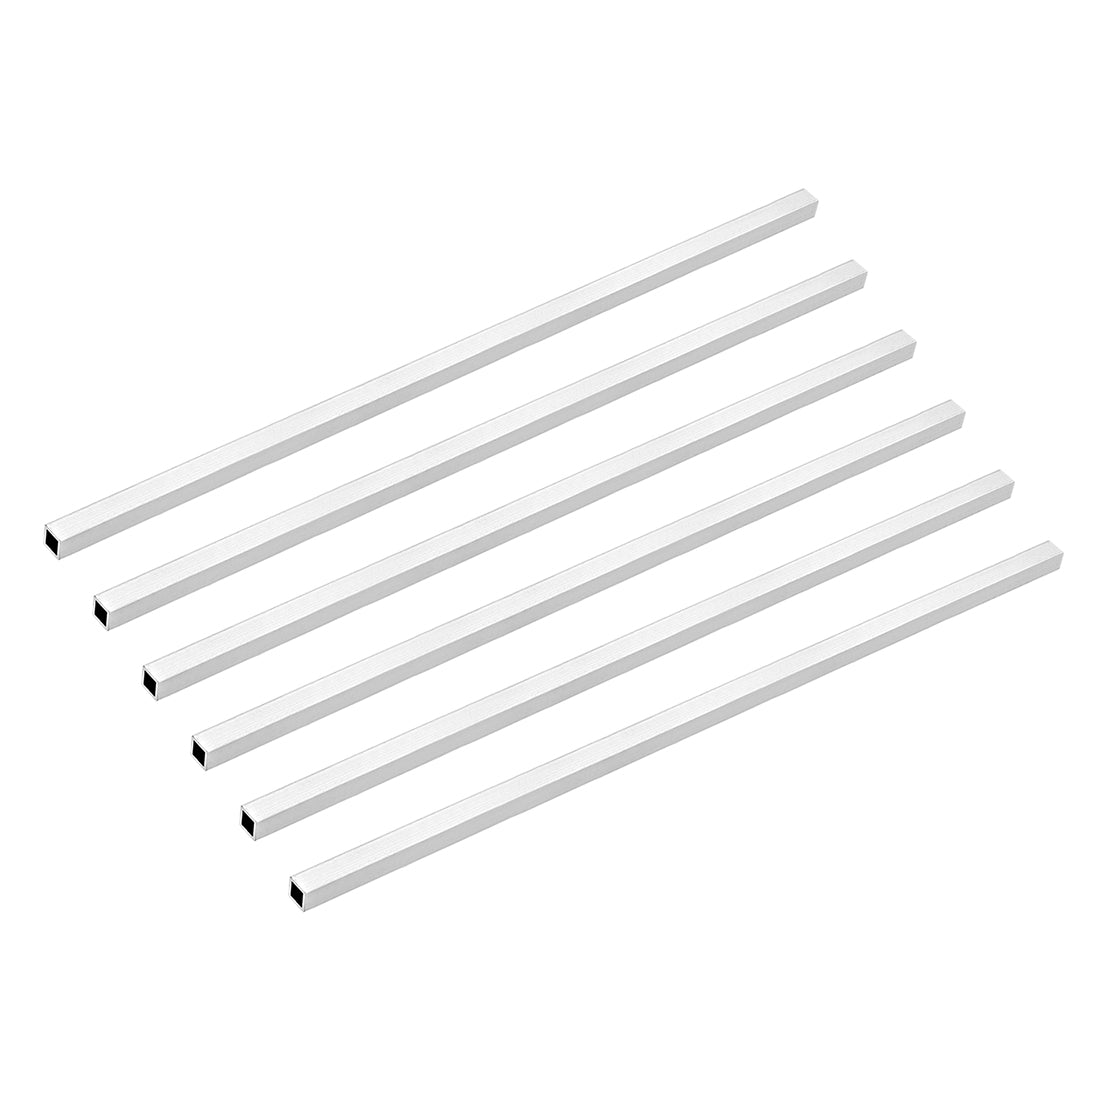  uxcell 6063 Aluminum Round Tube 20mm OD 17mm Inner Dia 200mm  Length Pipe Tubing 4 Pcs : Industrial & Scientific